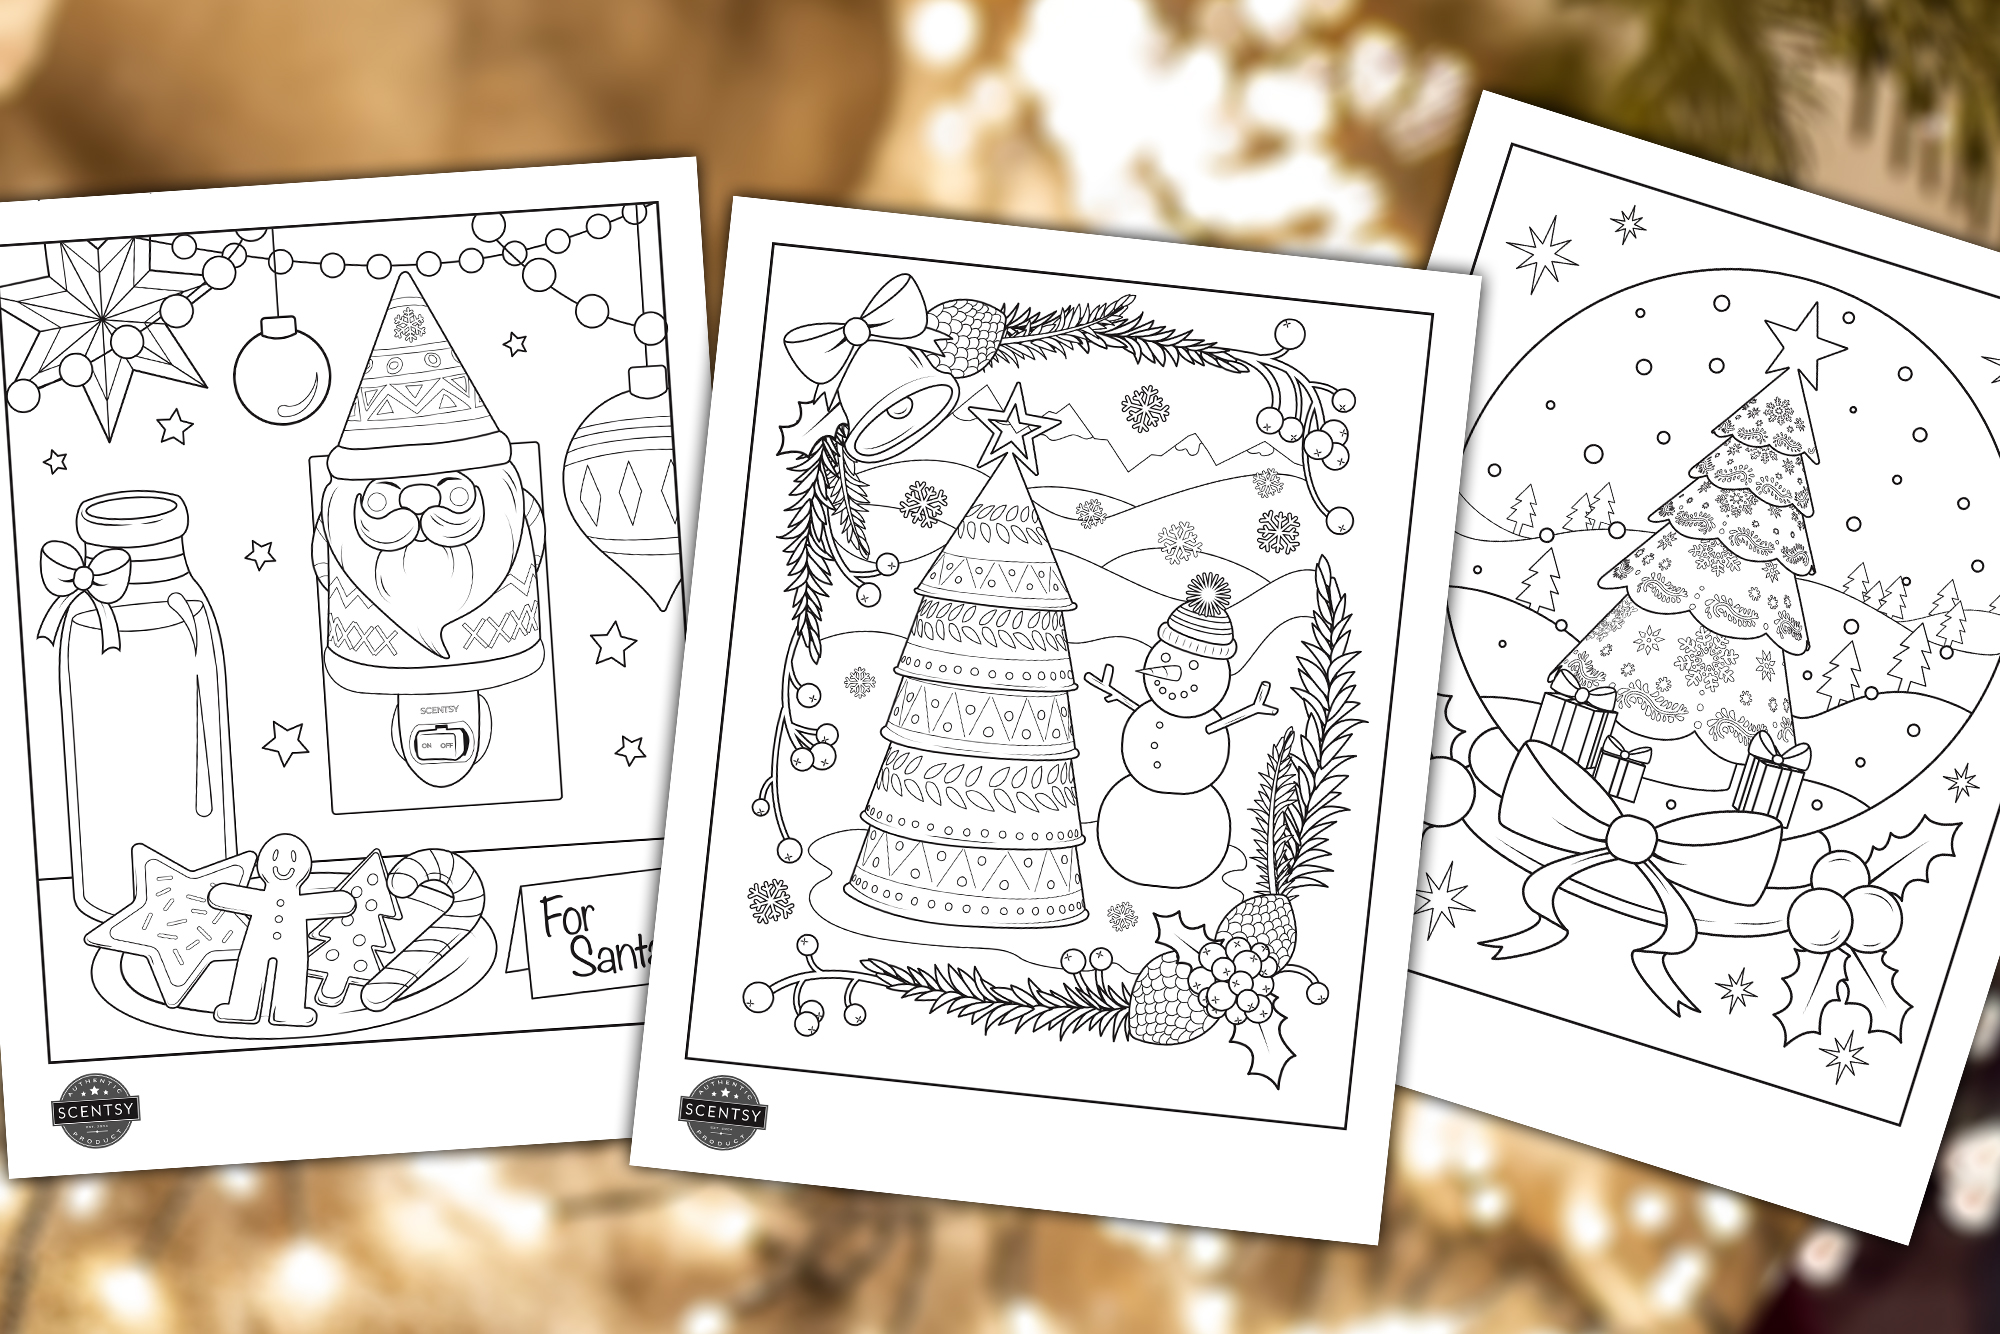 Three Scentsy coloring pages all featuring Scentsy holiday wax warrmers!